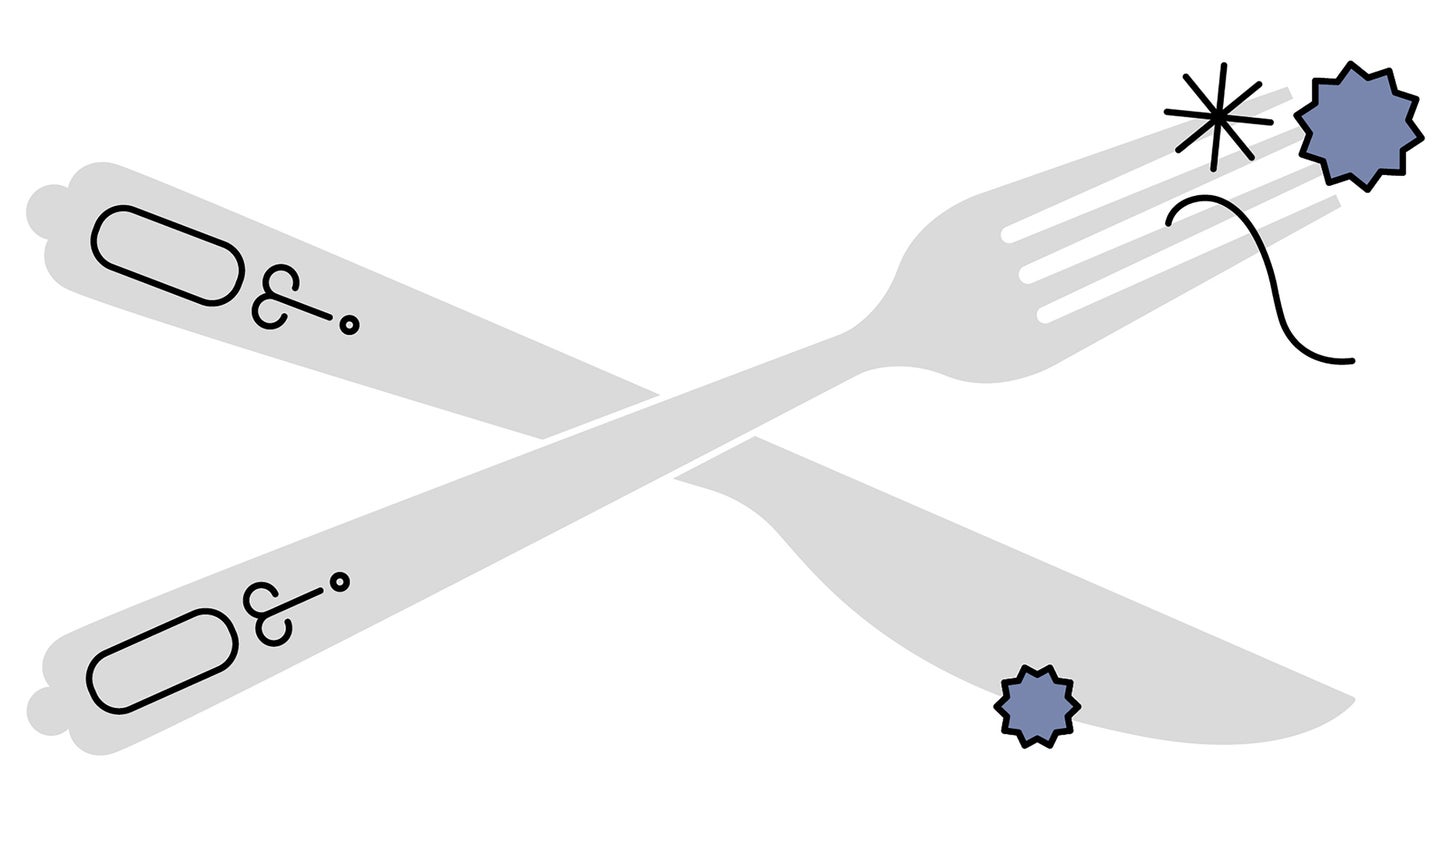 An illustration of a fork and knife with gross things on them.